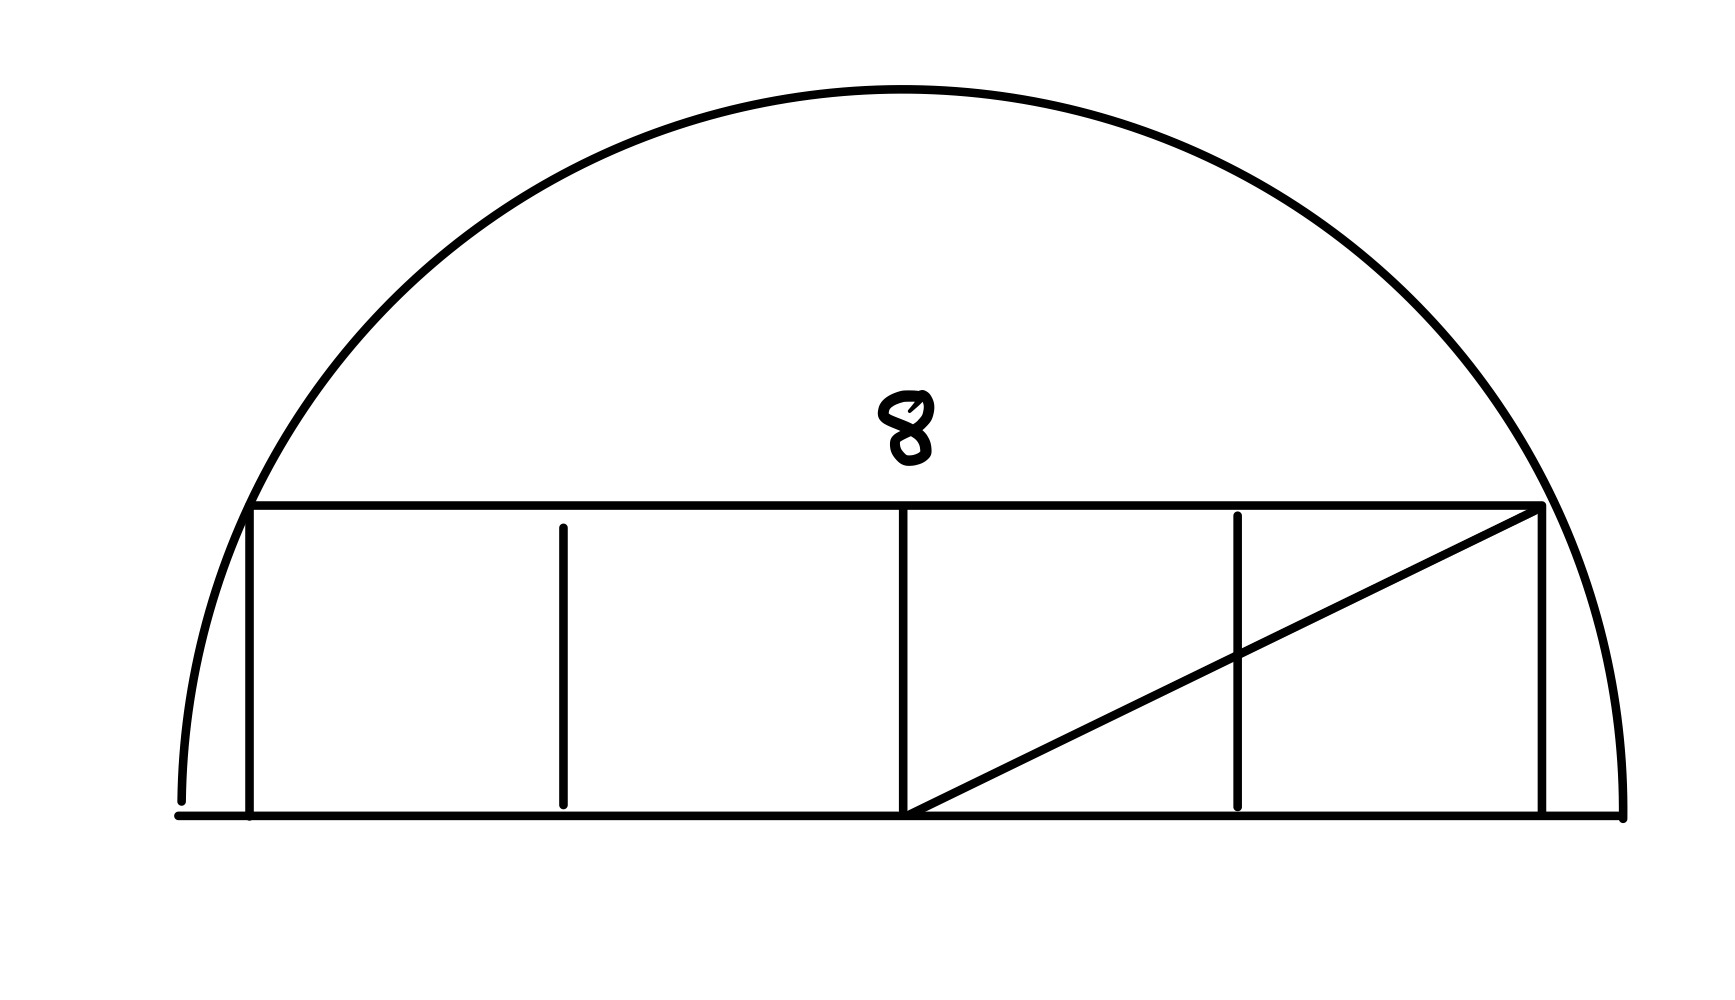 Four squares in a semi-circle with equal squares